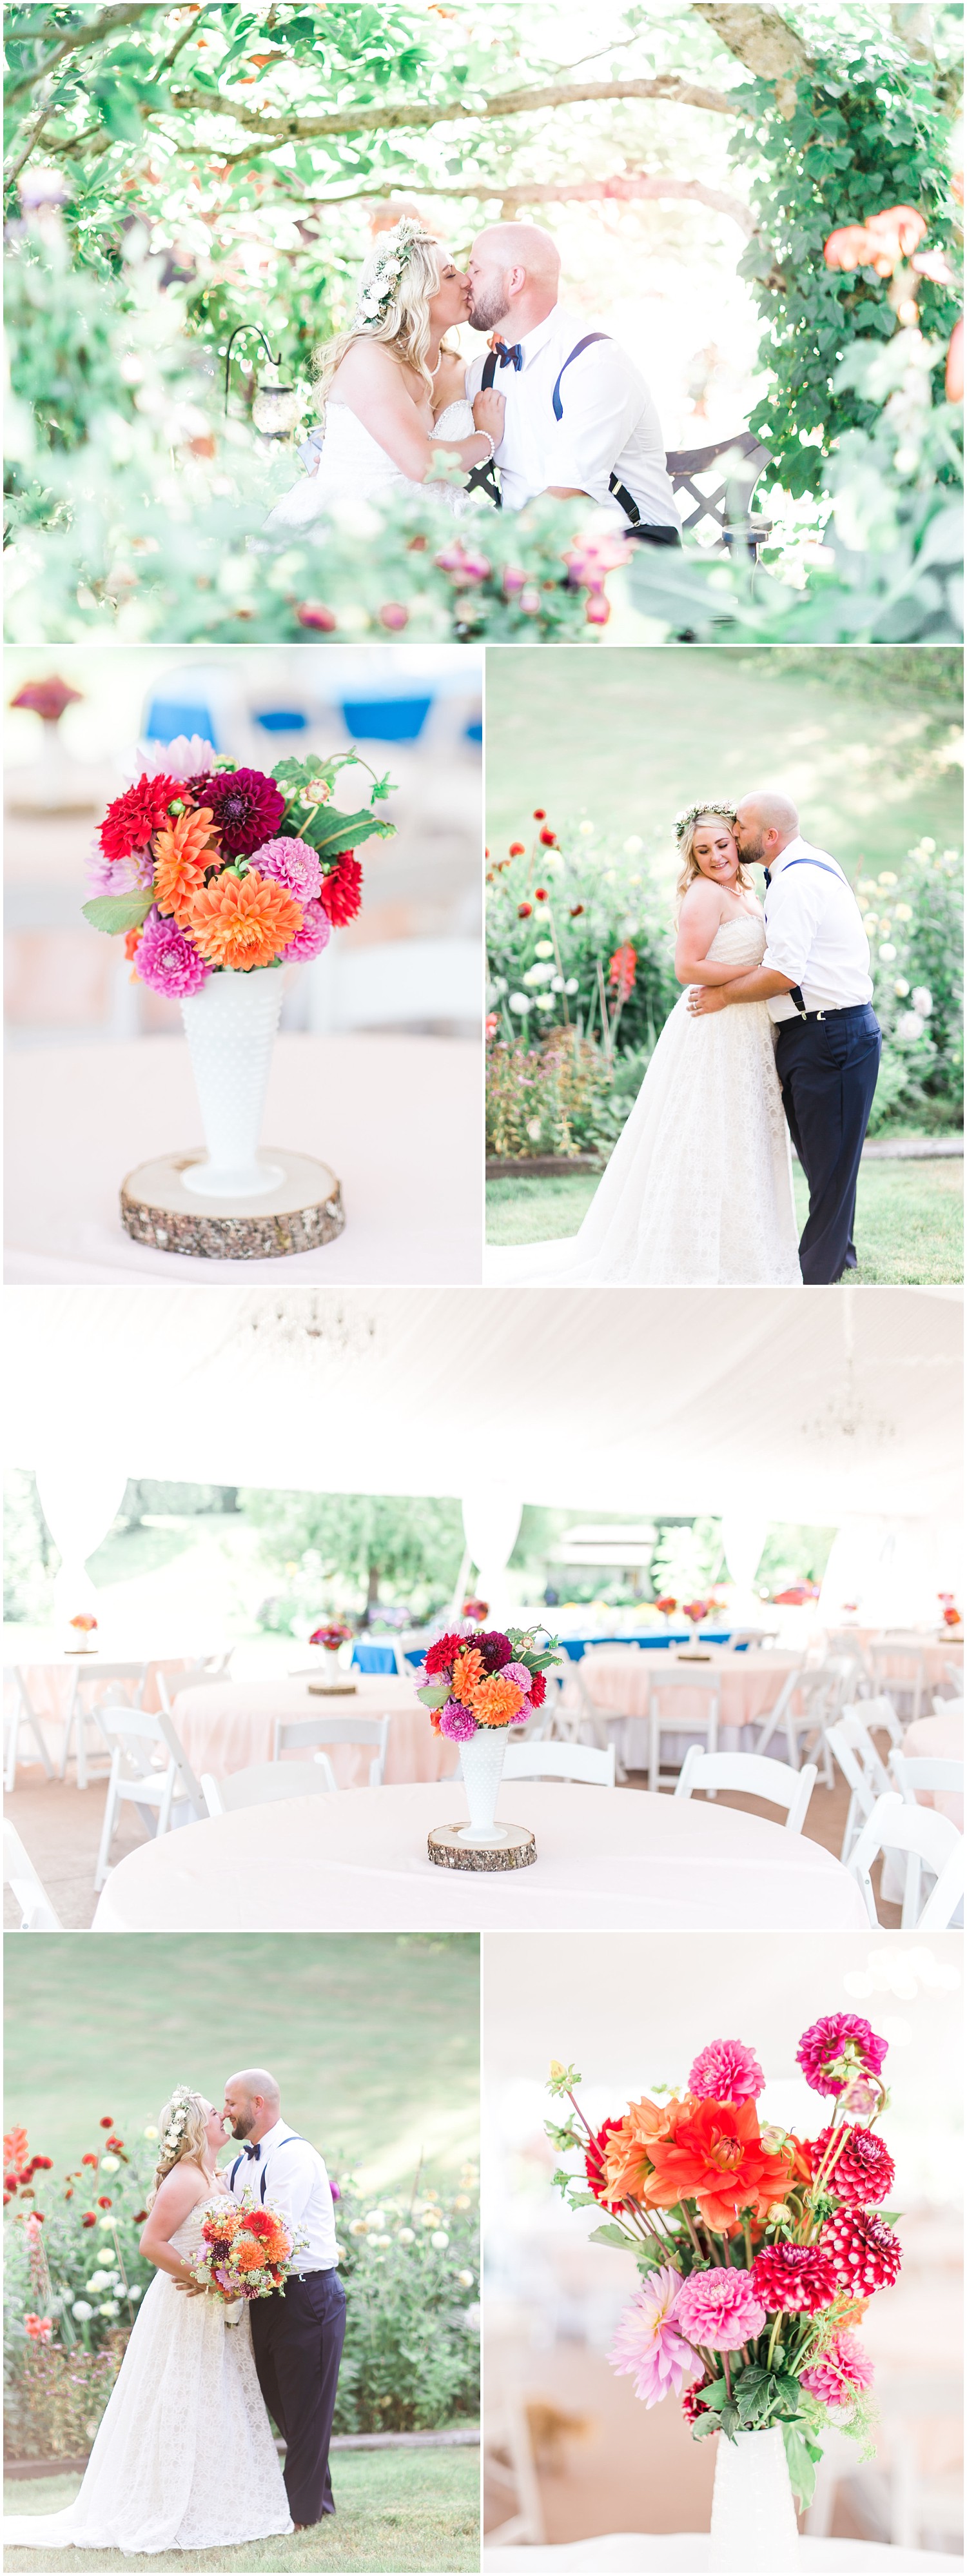 A Colorful Wildflower Wedding at Wild Rose Weddings